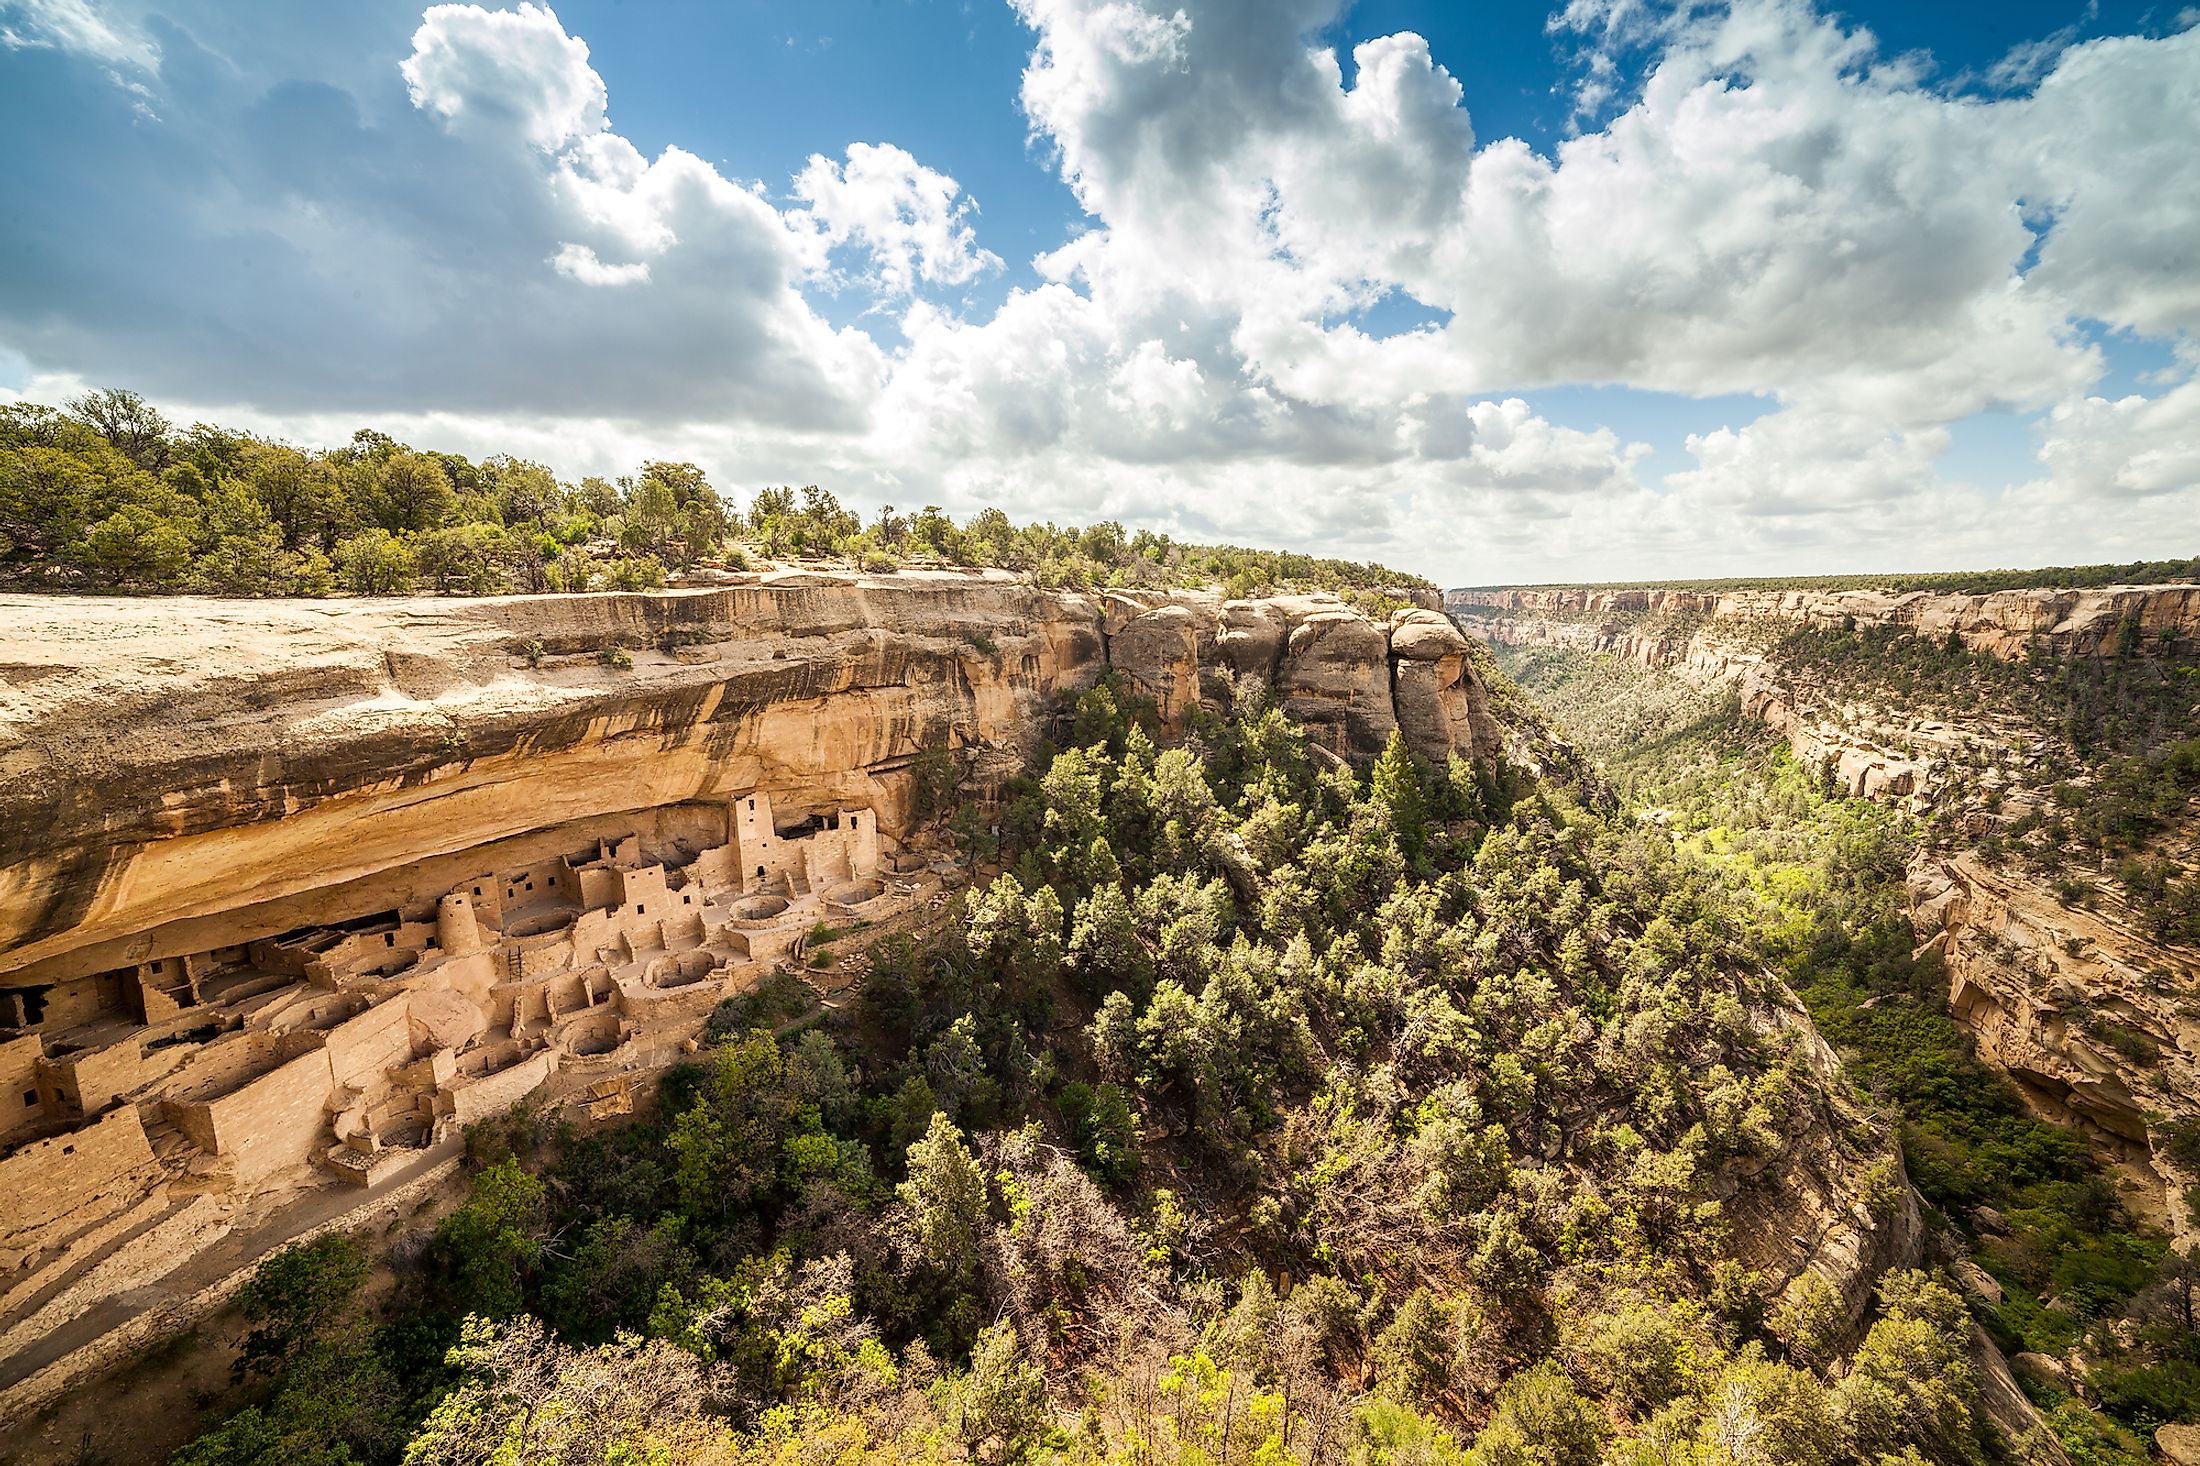 Cliff dwellings in Mesa Verde National Parks, Colorado, USA